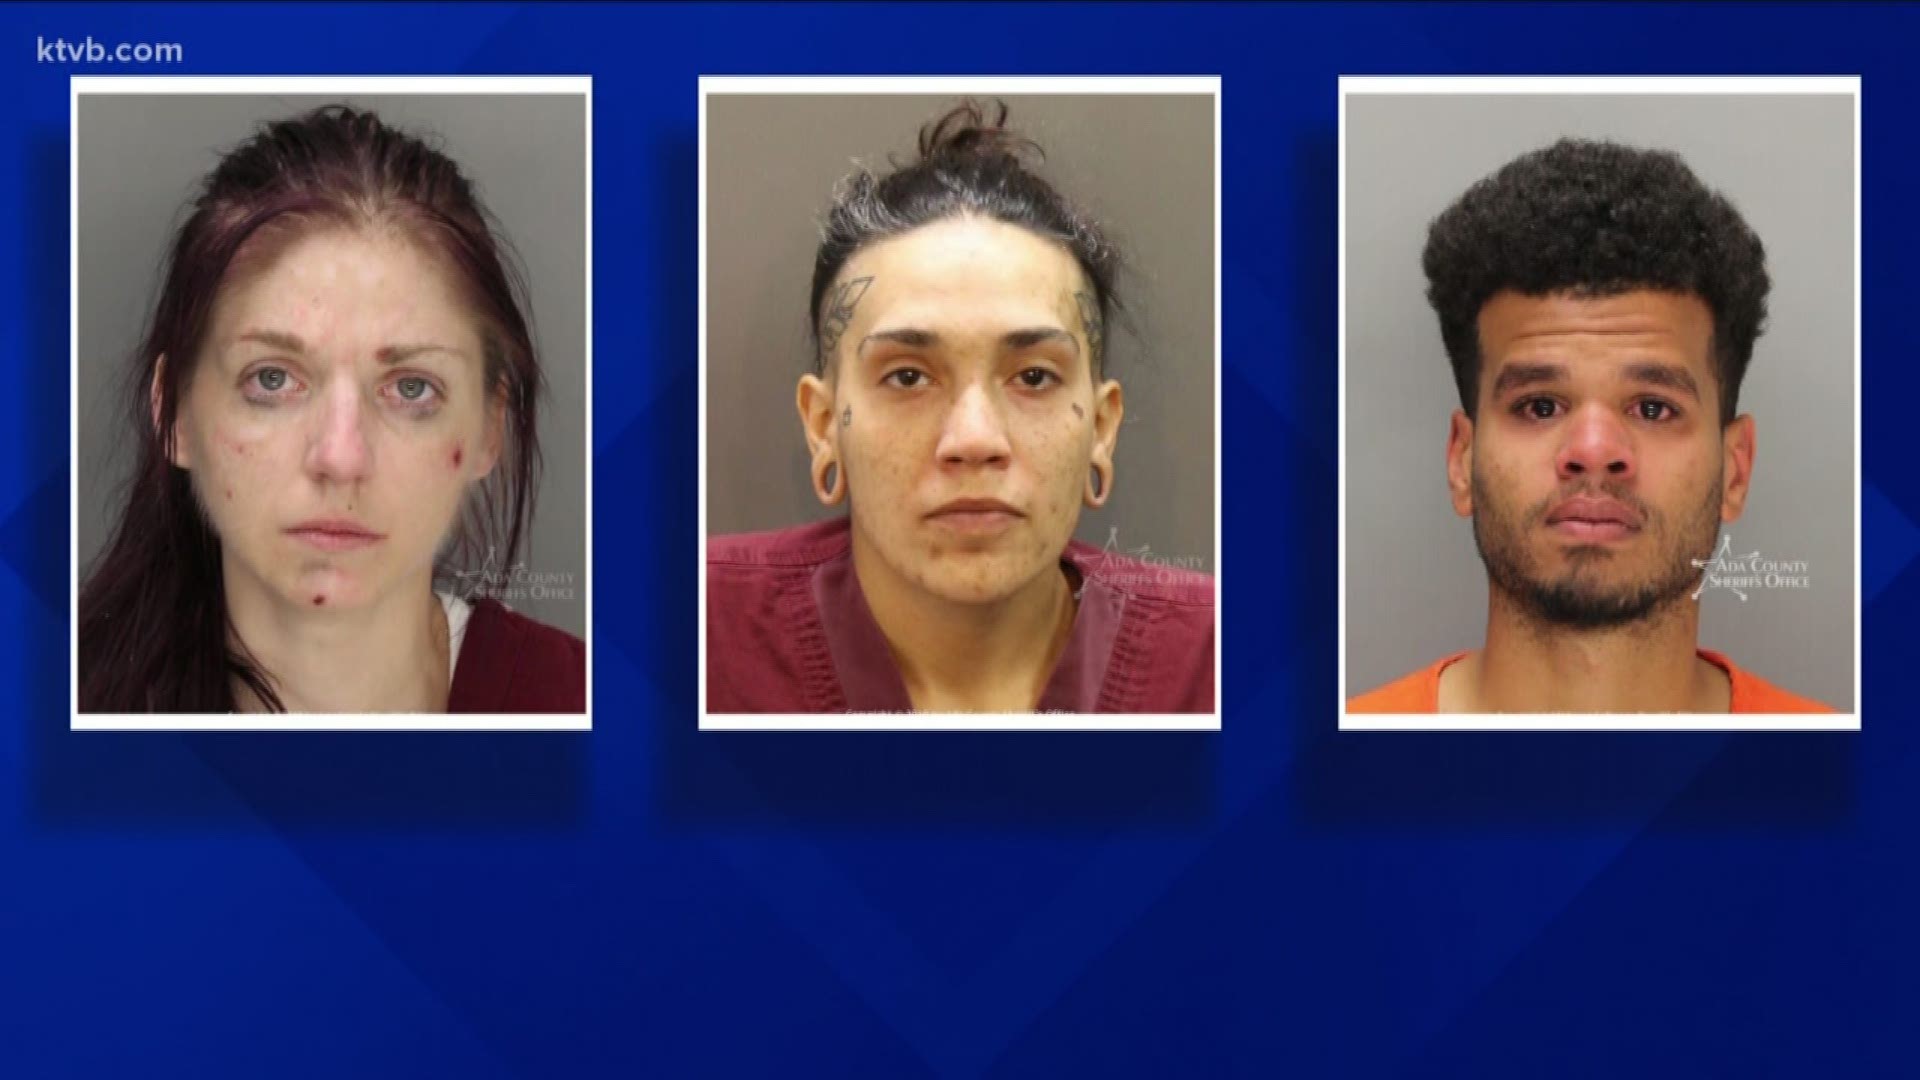 Three Face Felony Charges After Drug Bust At Boise Home 5902